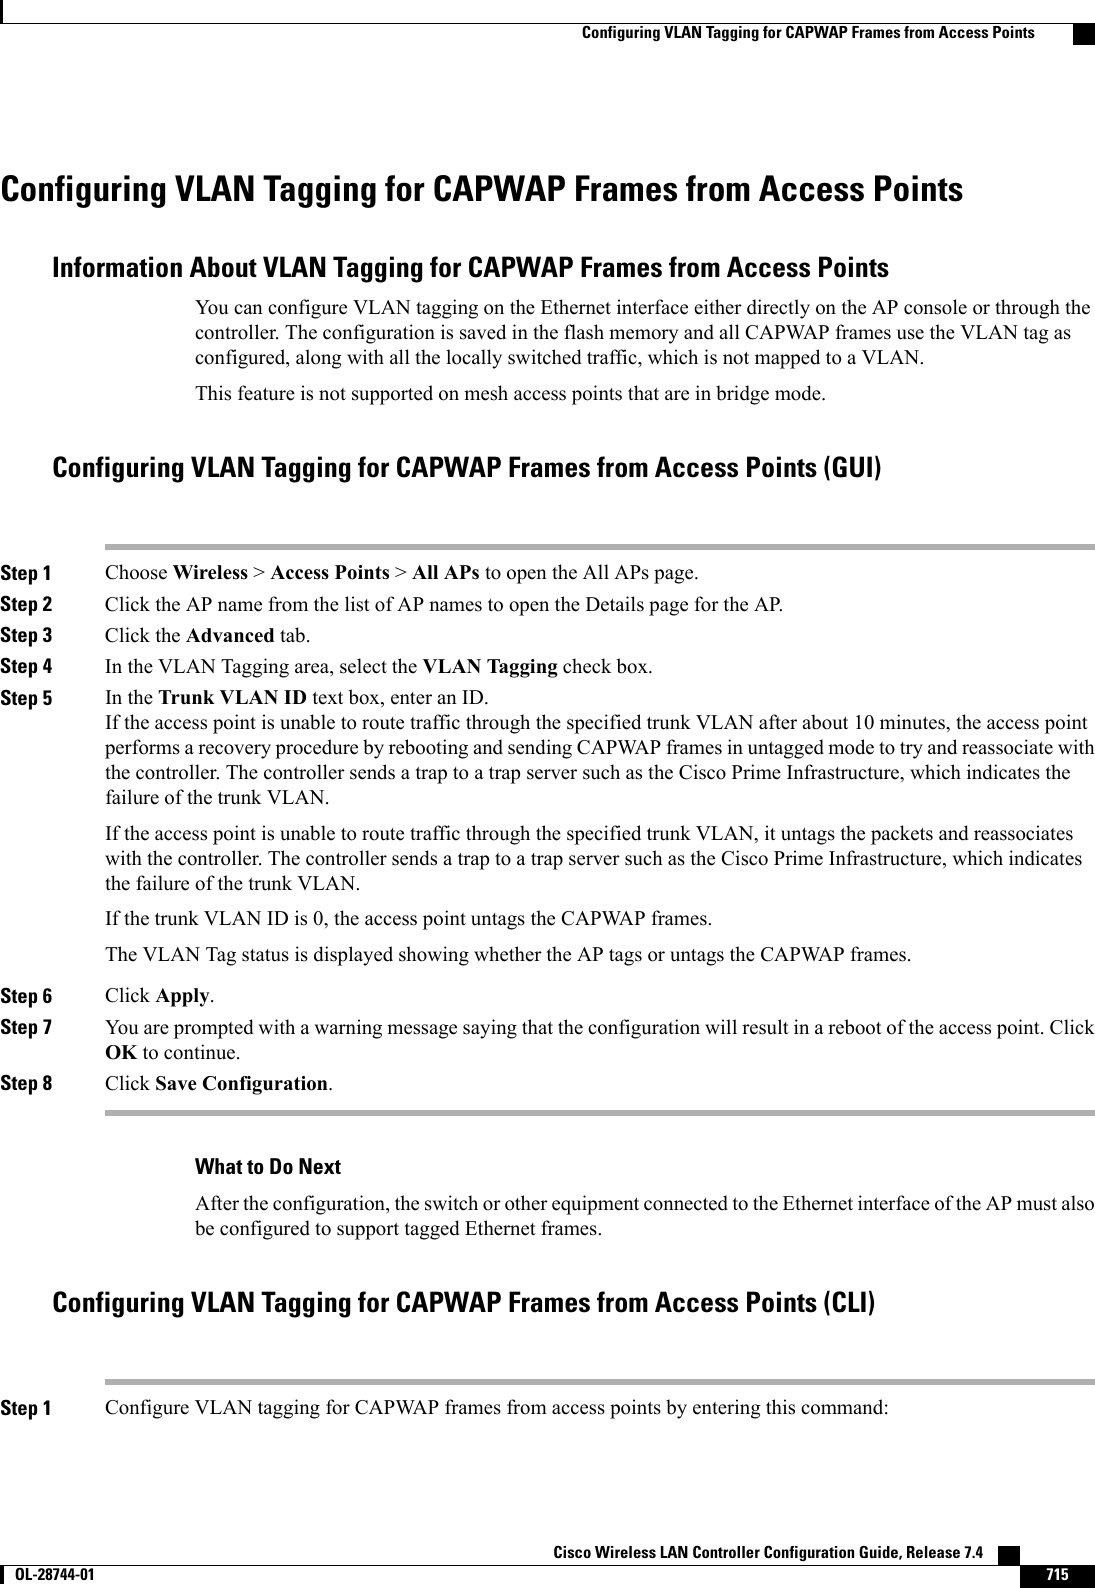 Configuring VLAN Tagging for CAPWAP Frames from Access PointsInformation About VLAN Tagging for CAPWAP Frames from Access PointsYou can configure VLAN tagging on the Ethernet interface either directly on the AP console or through thecontroller. The configuration is saved in the flash memory and all CAPWAP frames use the VLAN tag asconfigured, along with all the locally switched traffic, which is not mapped to a VLAN.This feature is not supported on mesh access points that are in bridge mode.Configuring VLAN Tagging for CAPWAP Frames from Access Points (GUI)Step 1 Choose Wireless &gt;Access Points &gt;All APs to open the All APs page.Step 2 Click the AP name from the list of AP names to open the Details page for the AP.Step 3 Click the Advanced tab.Step 4 In the VLAN Tagging area, select the VLAN Tagging check box.Step 5 In the Trunk VLAN ID text box, enter an ID.If the access point is unable to route traffic through the specified trunk VLAN after about 10 minutes, the access pointperforms a recovery procedure by rebooting and sending CAPWAP frames in untagged mode to try and reassociate withthe controller. The controller sends a trap to a trap server such as the Cisco Prime Infrastructure, which indicates thefailure of the trunk VLAN.If the access point is unable to route traffic through the specified trunk VLAN, it untags the packets and reassociateswith the controller. The controller sends a trap to a trap server such as the Cisco Prime Infrastructure, which indicatesthe failure of the trunk VLAN.If the trunk VLAN ID is 0, the access point untags the CAPWAP frames.The VLAN Tag status is displayed showing whether the AP tags or untags the CAPWAP frames.Step 6 Click Apply.Step 7 You are prompted with a warning message saying that the configuration will result in a reboot of the access point. ClickOK to continue.Step 8 Click Save Configuration.What to Do NextAfter the configuration, the switch or other equipment connected to the Ethernet interface of the AP must alsobe configured to support tagged Ethernet frames.Configuring VLAN Tagging for CAPWAP Frames from Access Points (CLI)Step 1 Configure VLAN tagging for CAPWAP frames from access points by entering this command:Cisco Wireless LAN Controller Configuration Guide, Release 7.4       OL-28744-01 715Configuring VLAN Tagging for CAPWAP Frames from Access Points